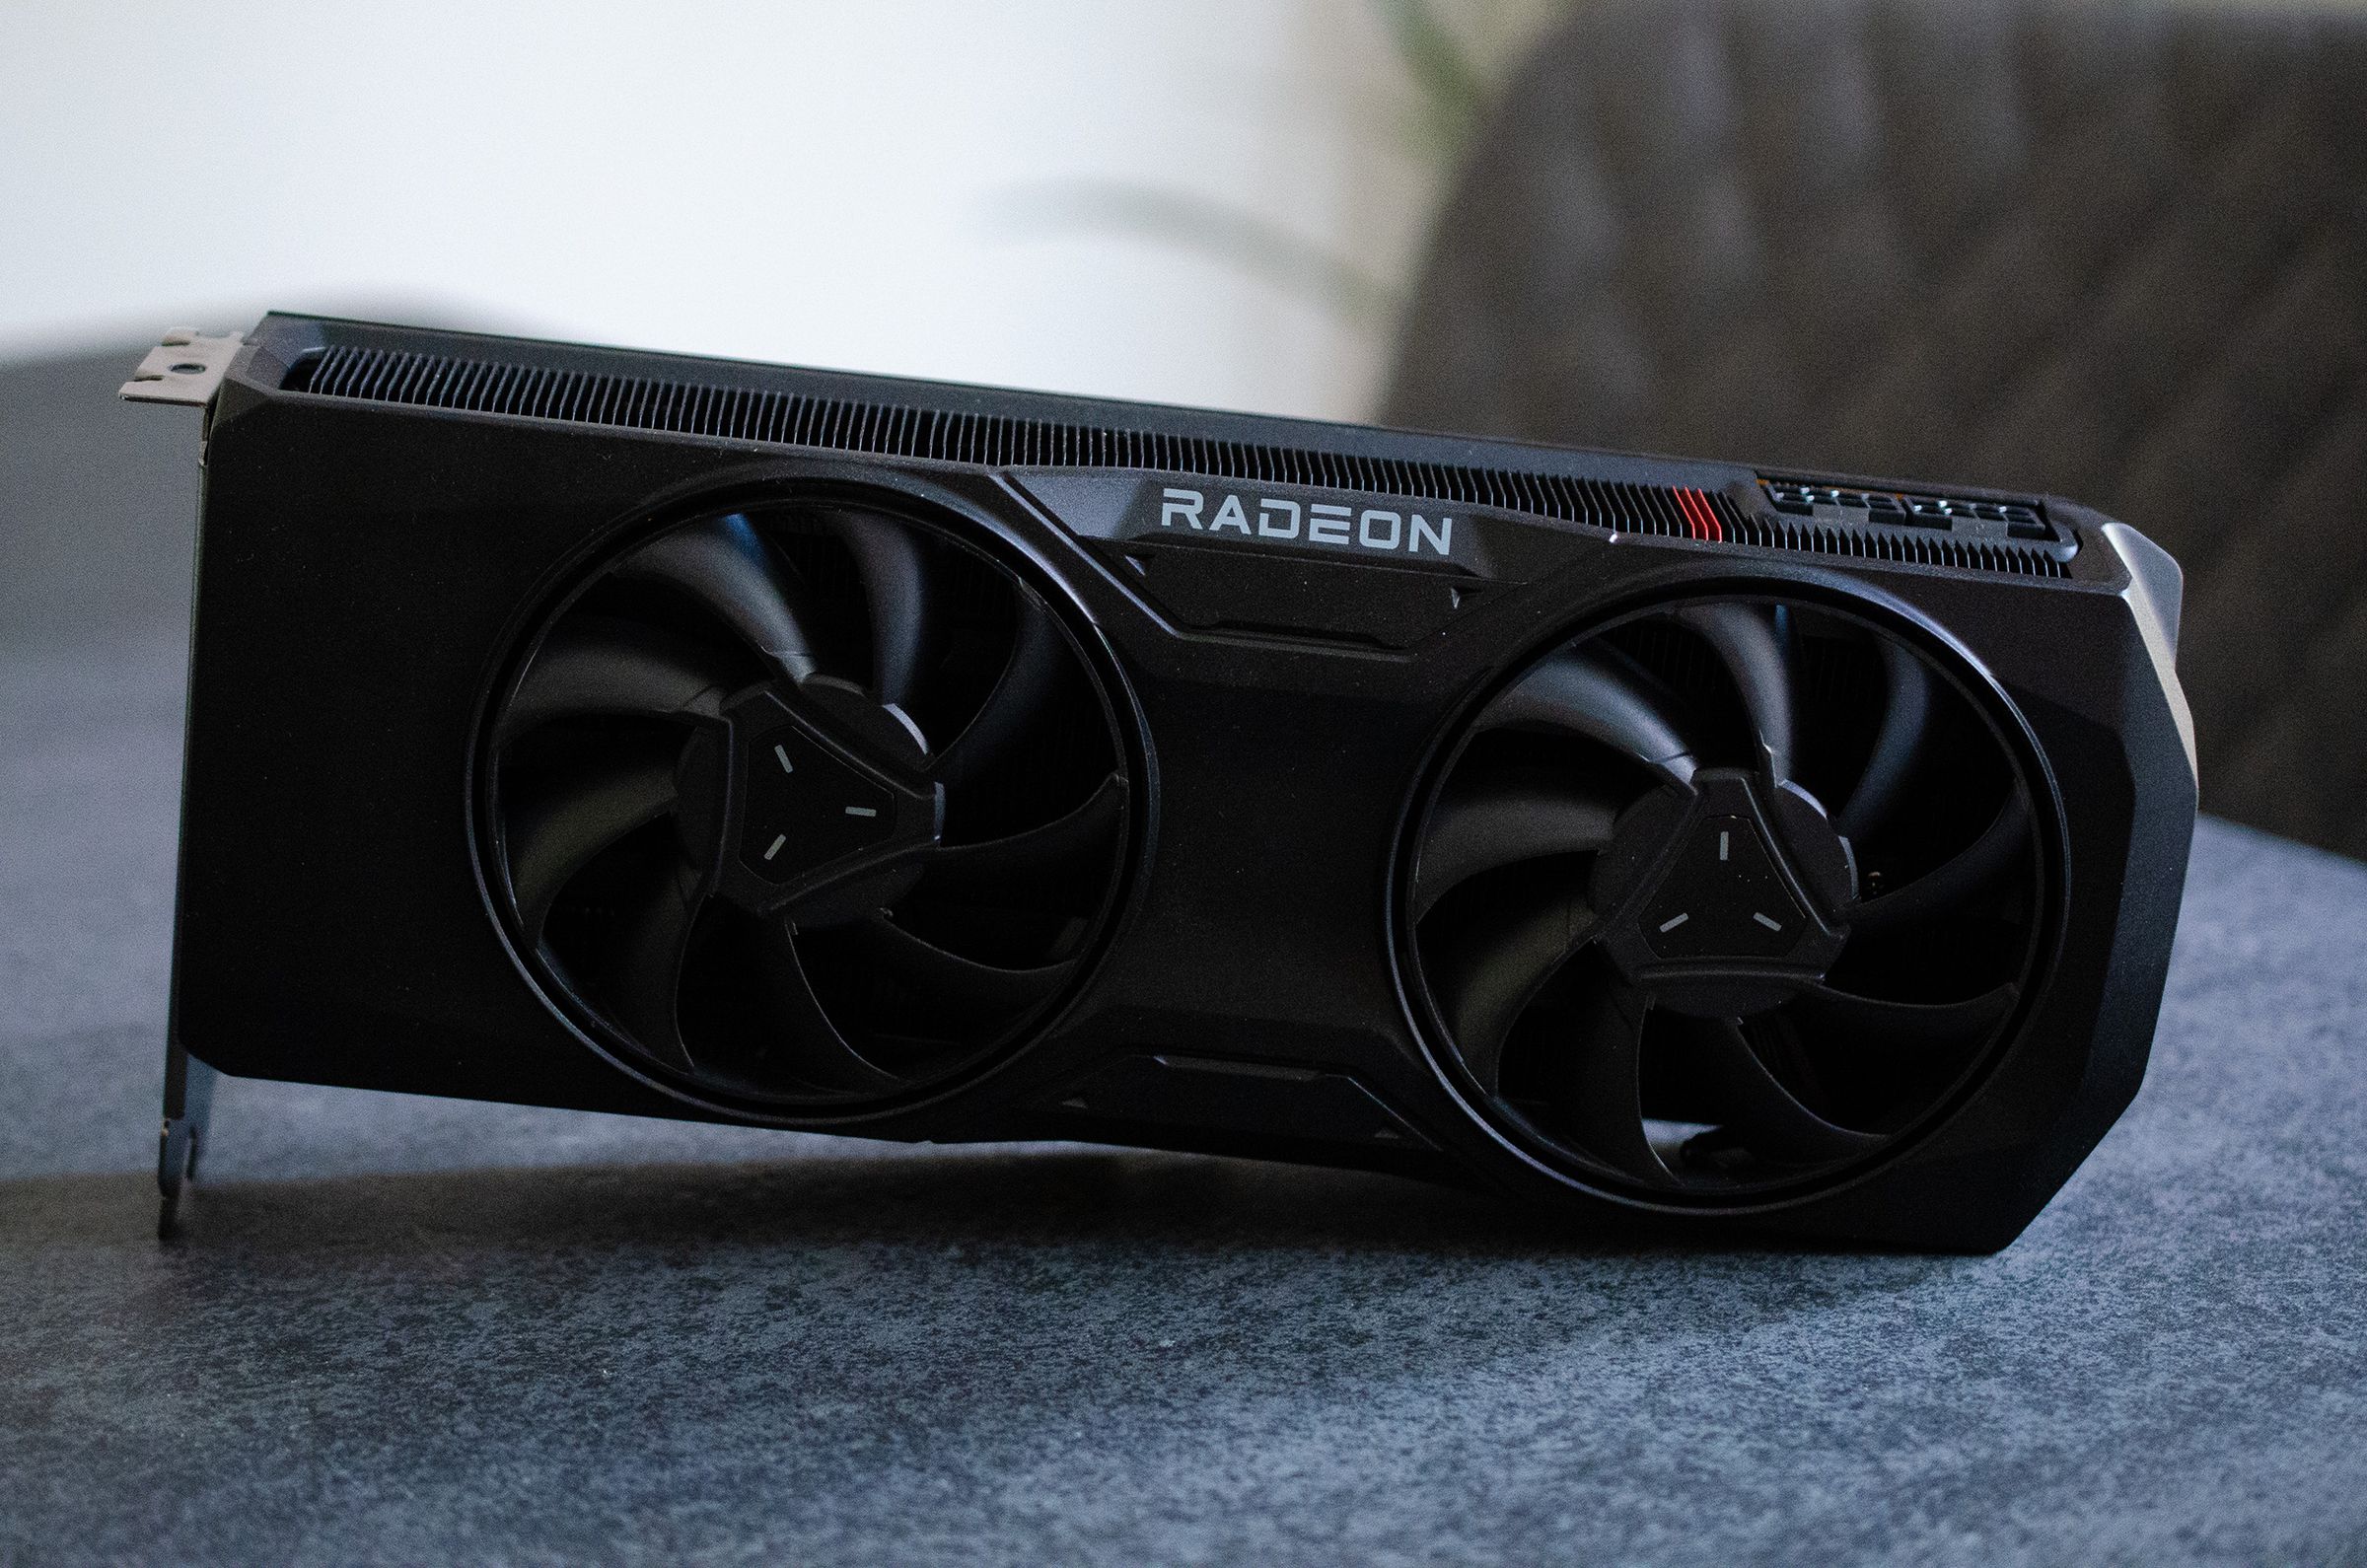 The RX 7800 XT is a solid pick for 1440p.